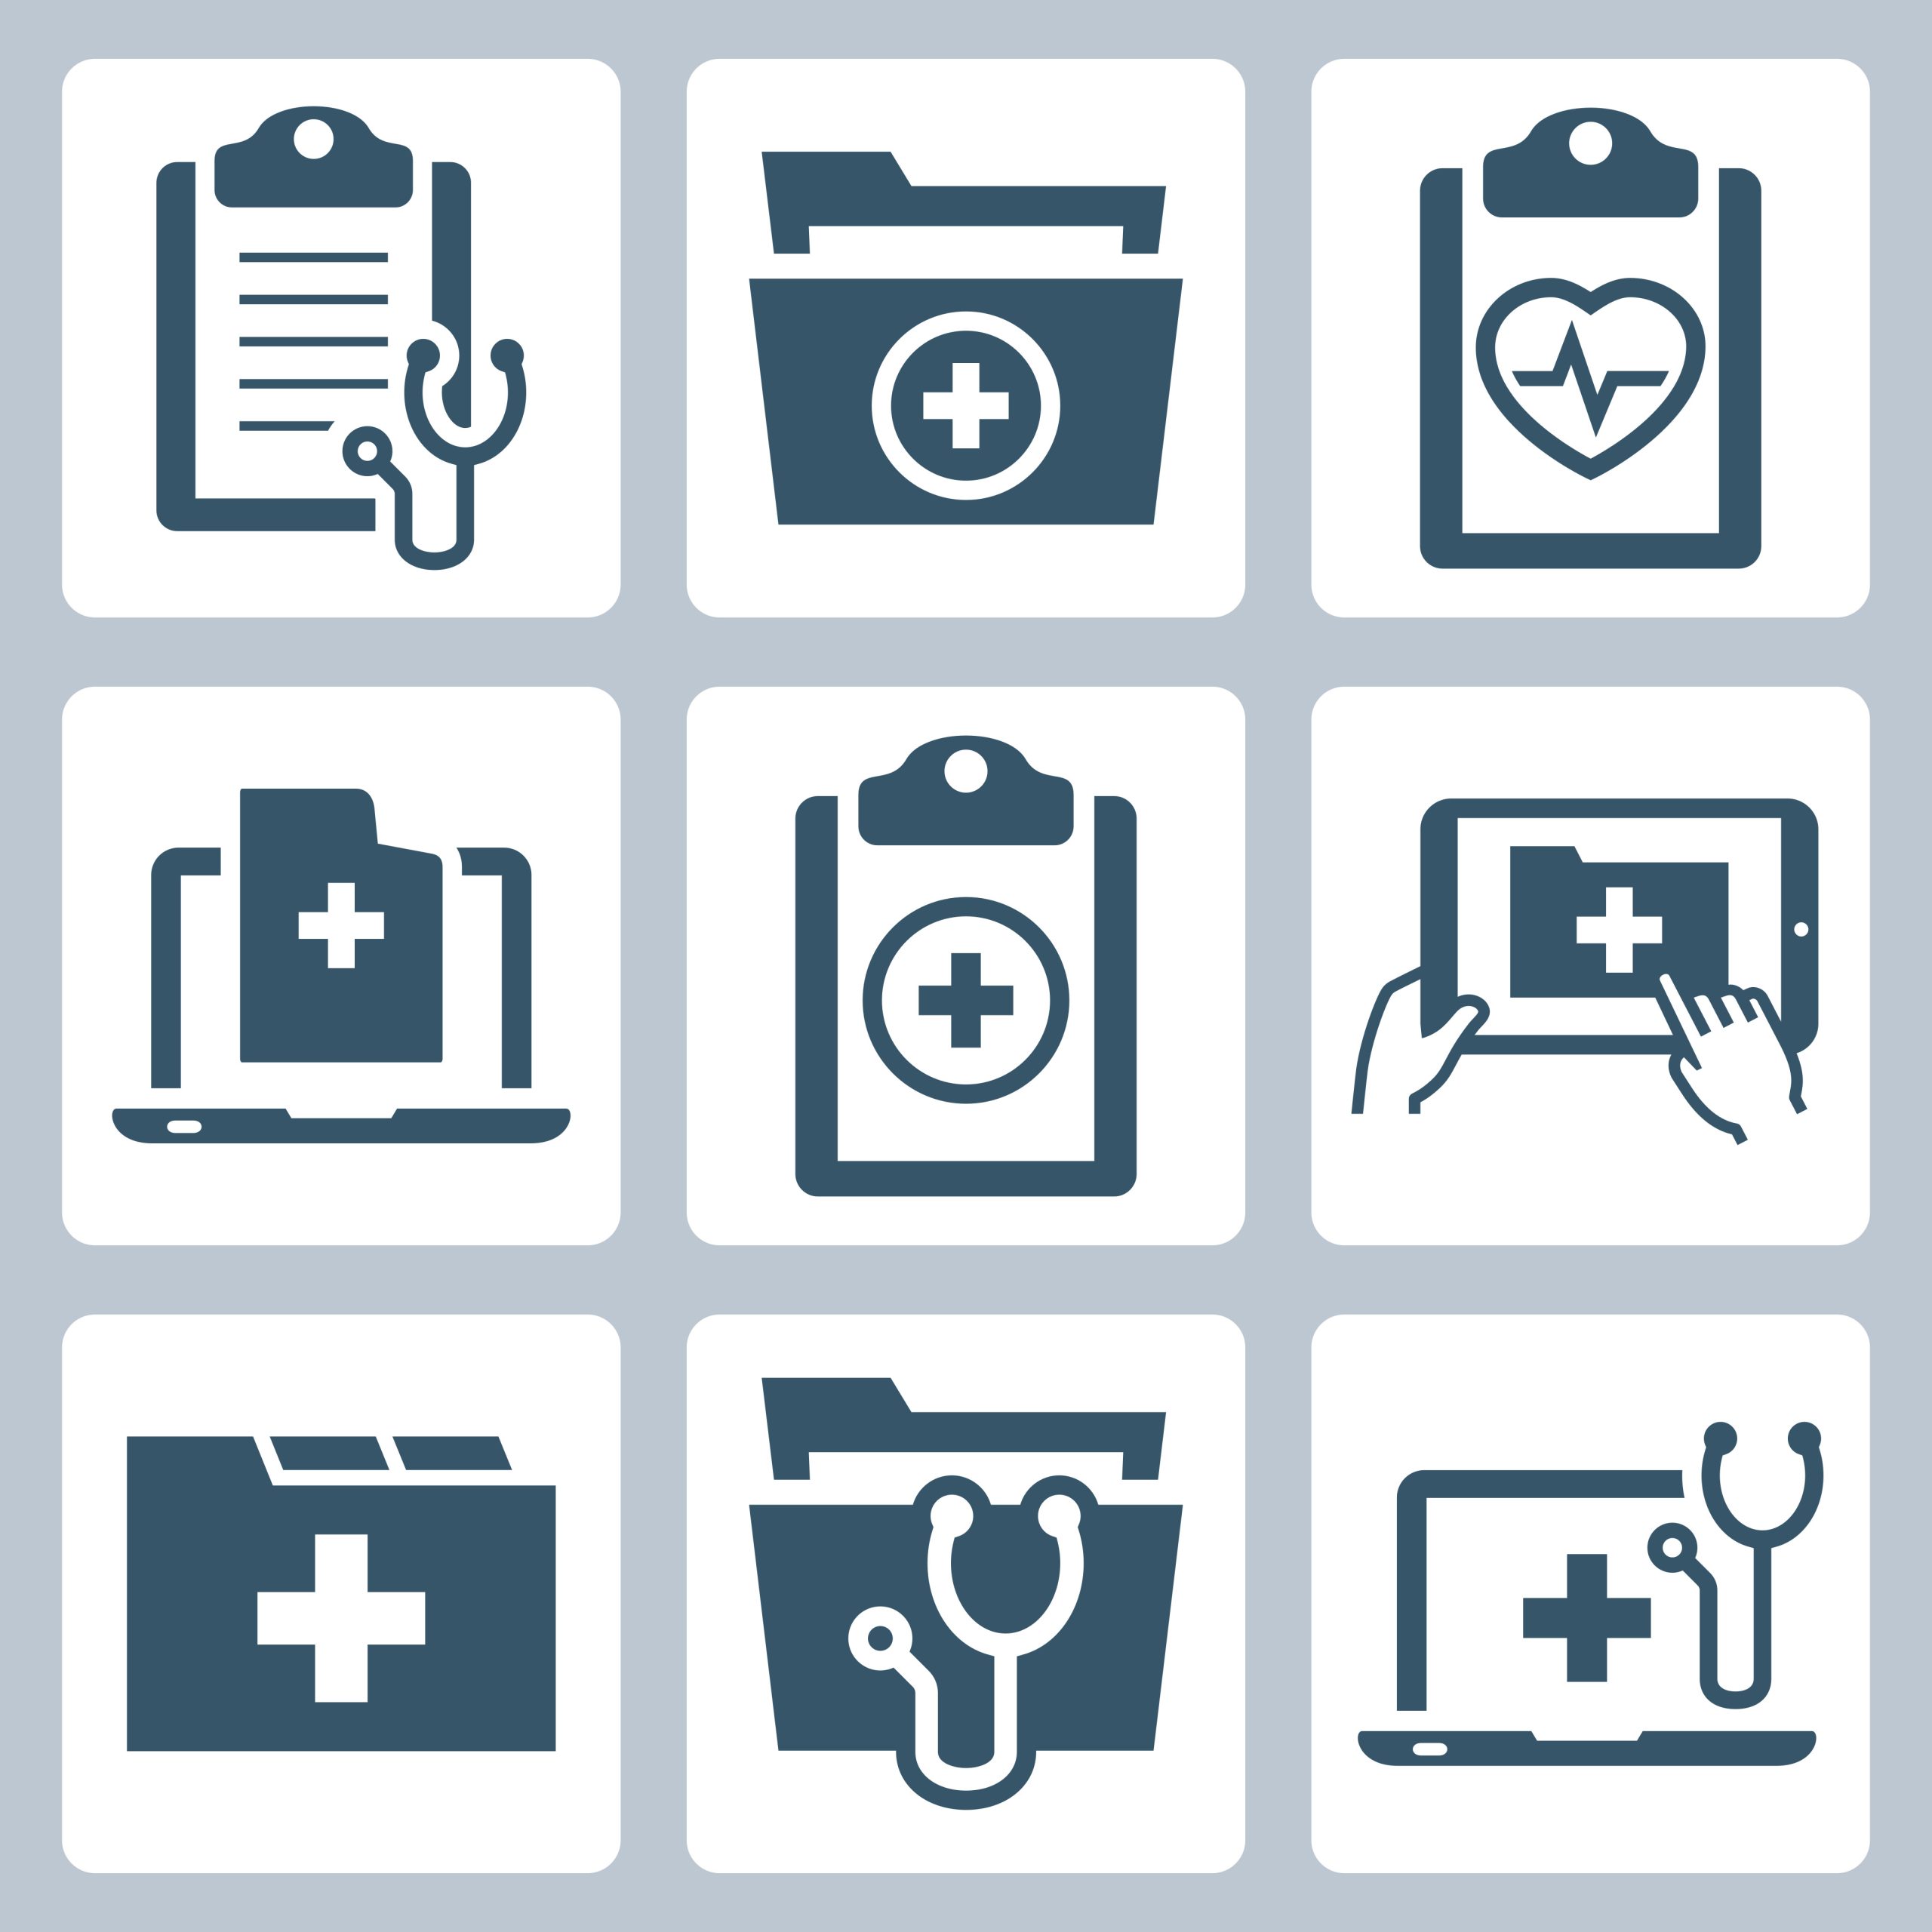 image of various icons depicting health-related documents, representing resources and tools for creating psychiatric advance directives